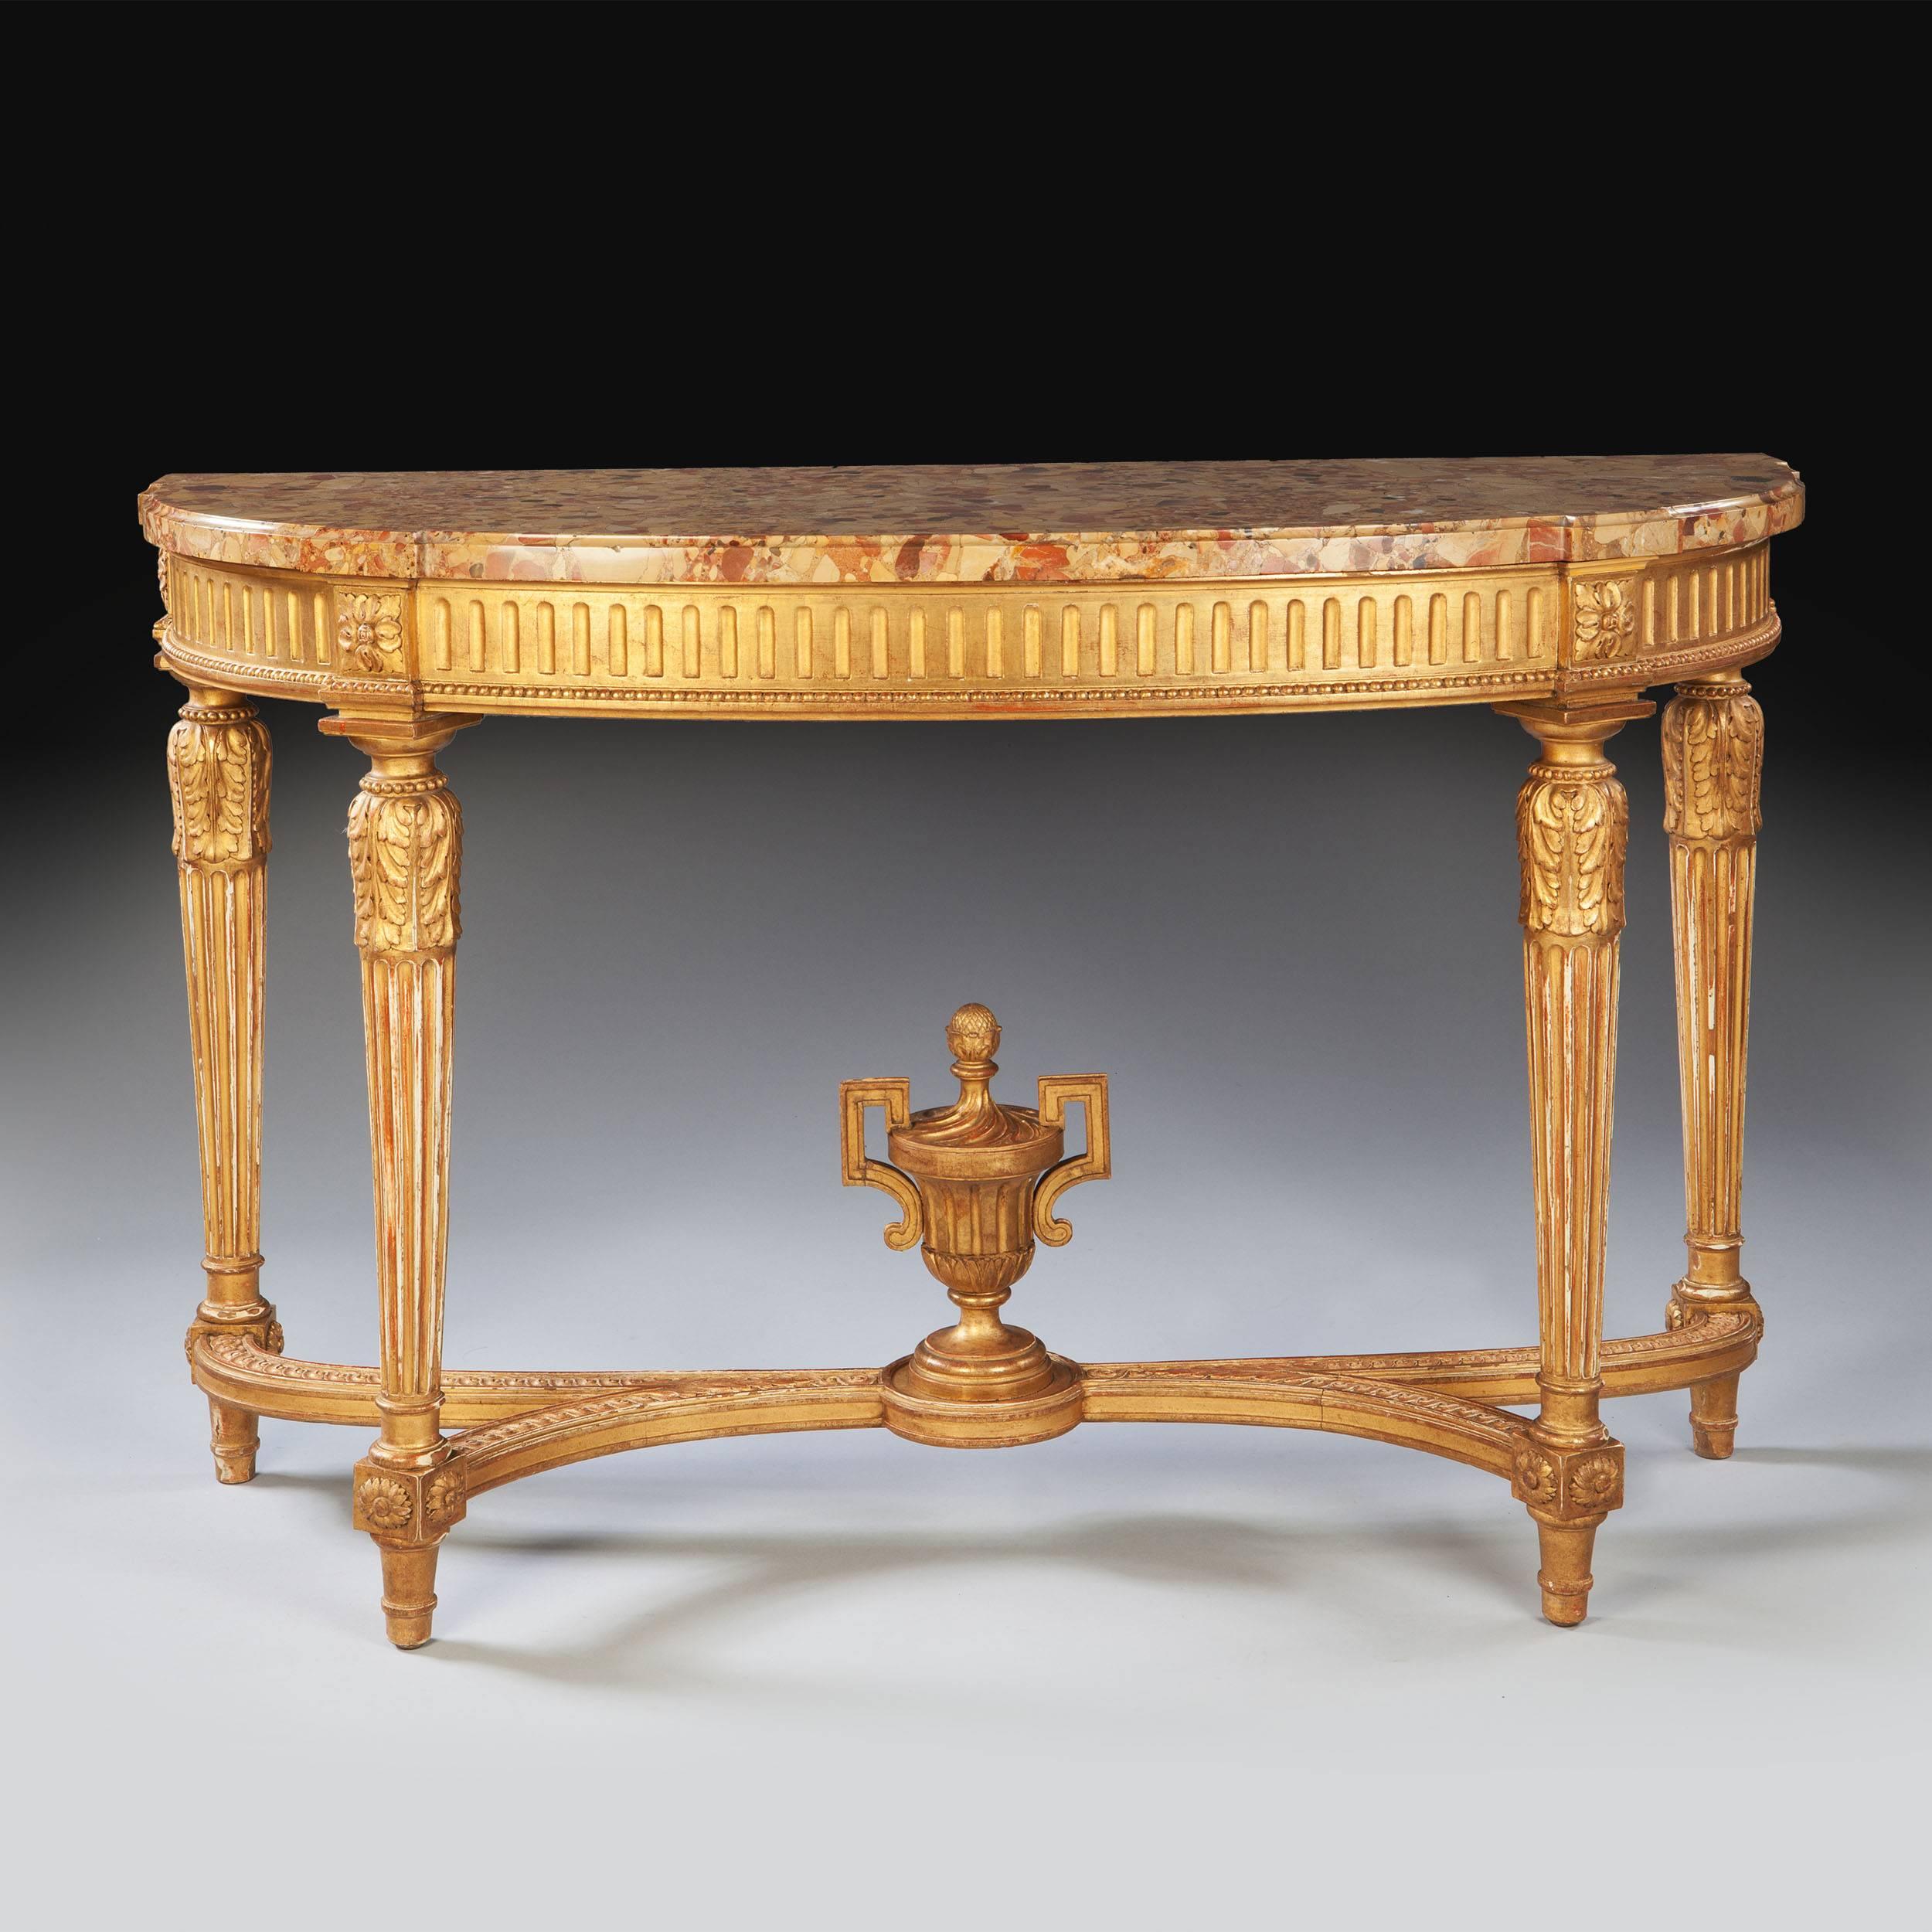 France, 1913.

A fine early 20th century neo classical giltwood gold console table, the D-shaped Breche d'Alep marble top above a fluted frieze with paterae and acanthus ornament, the fluted tapering legs joined by an X-stretcher with a central